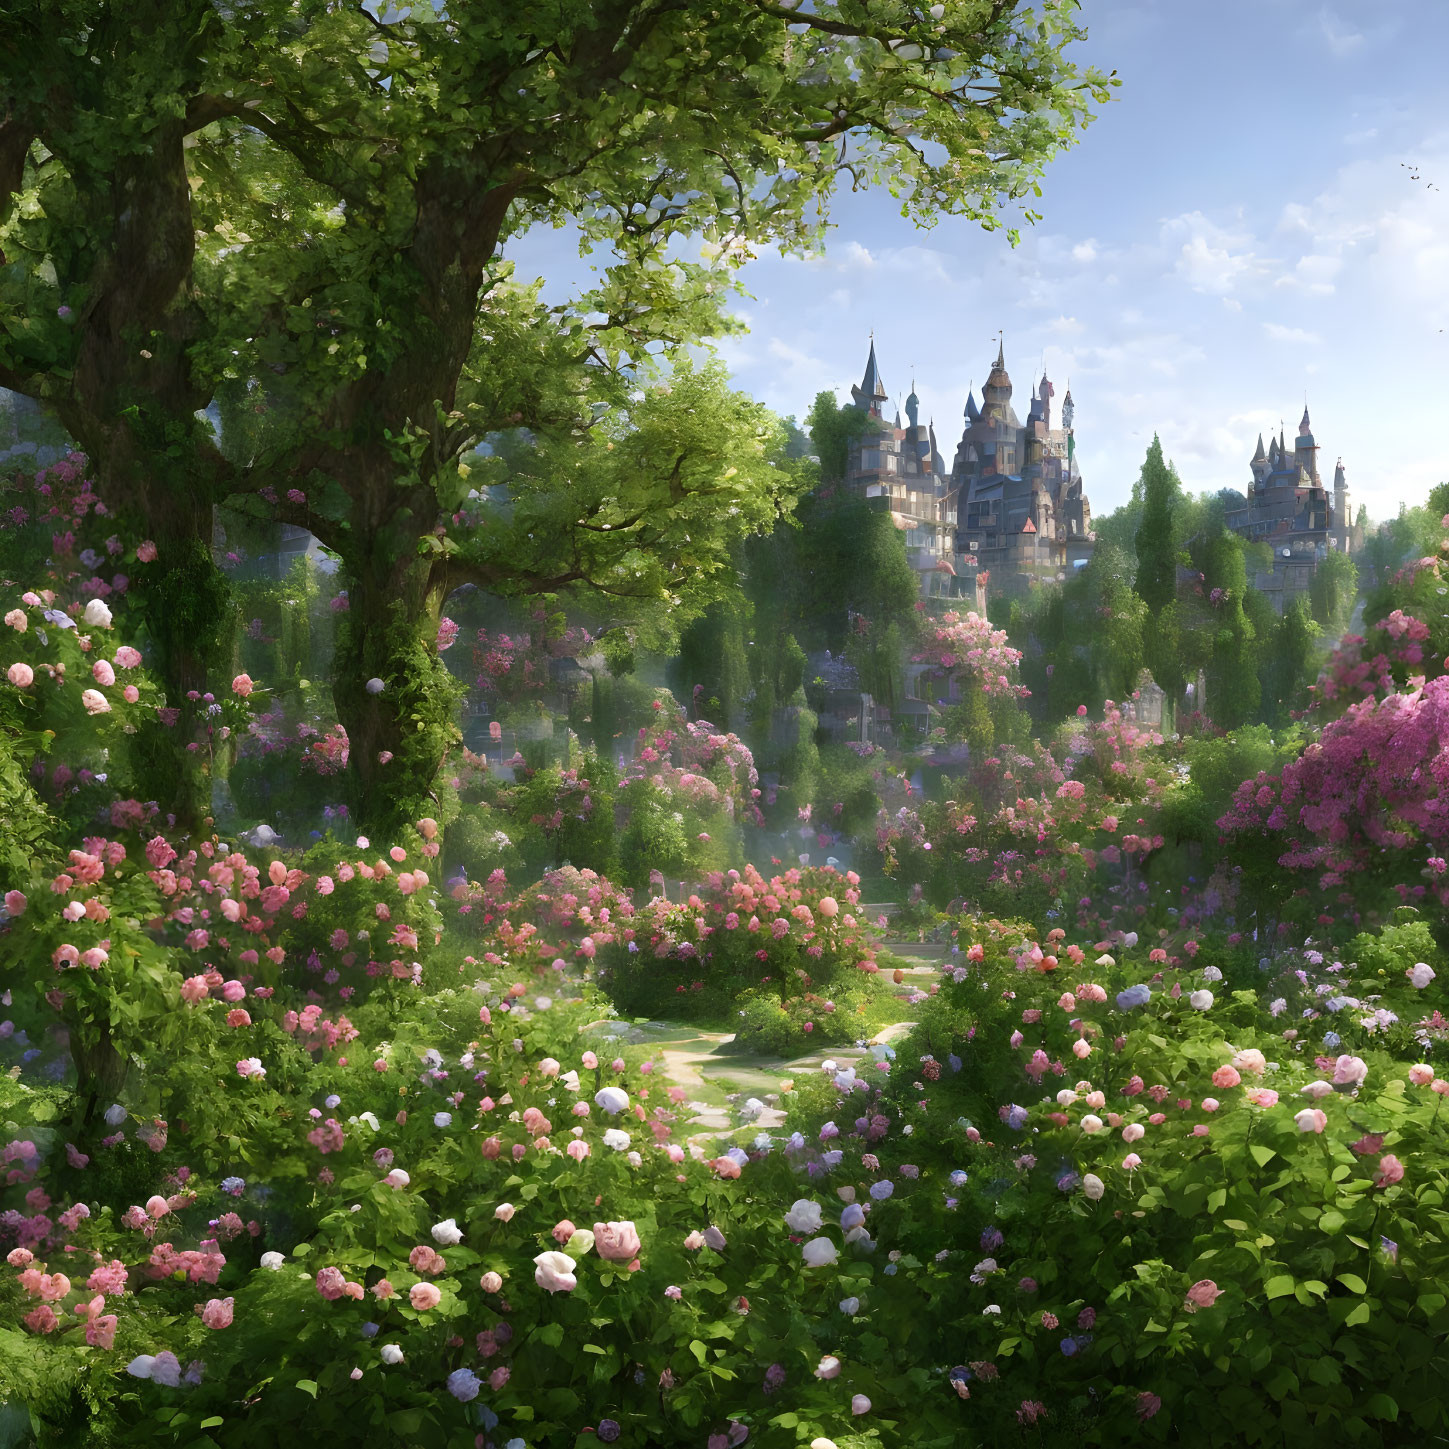 Lush sunlit garden with colorful flowers and fairy-tale castle